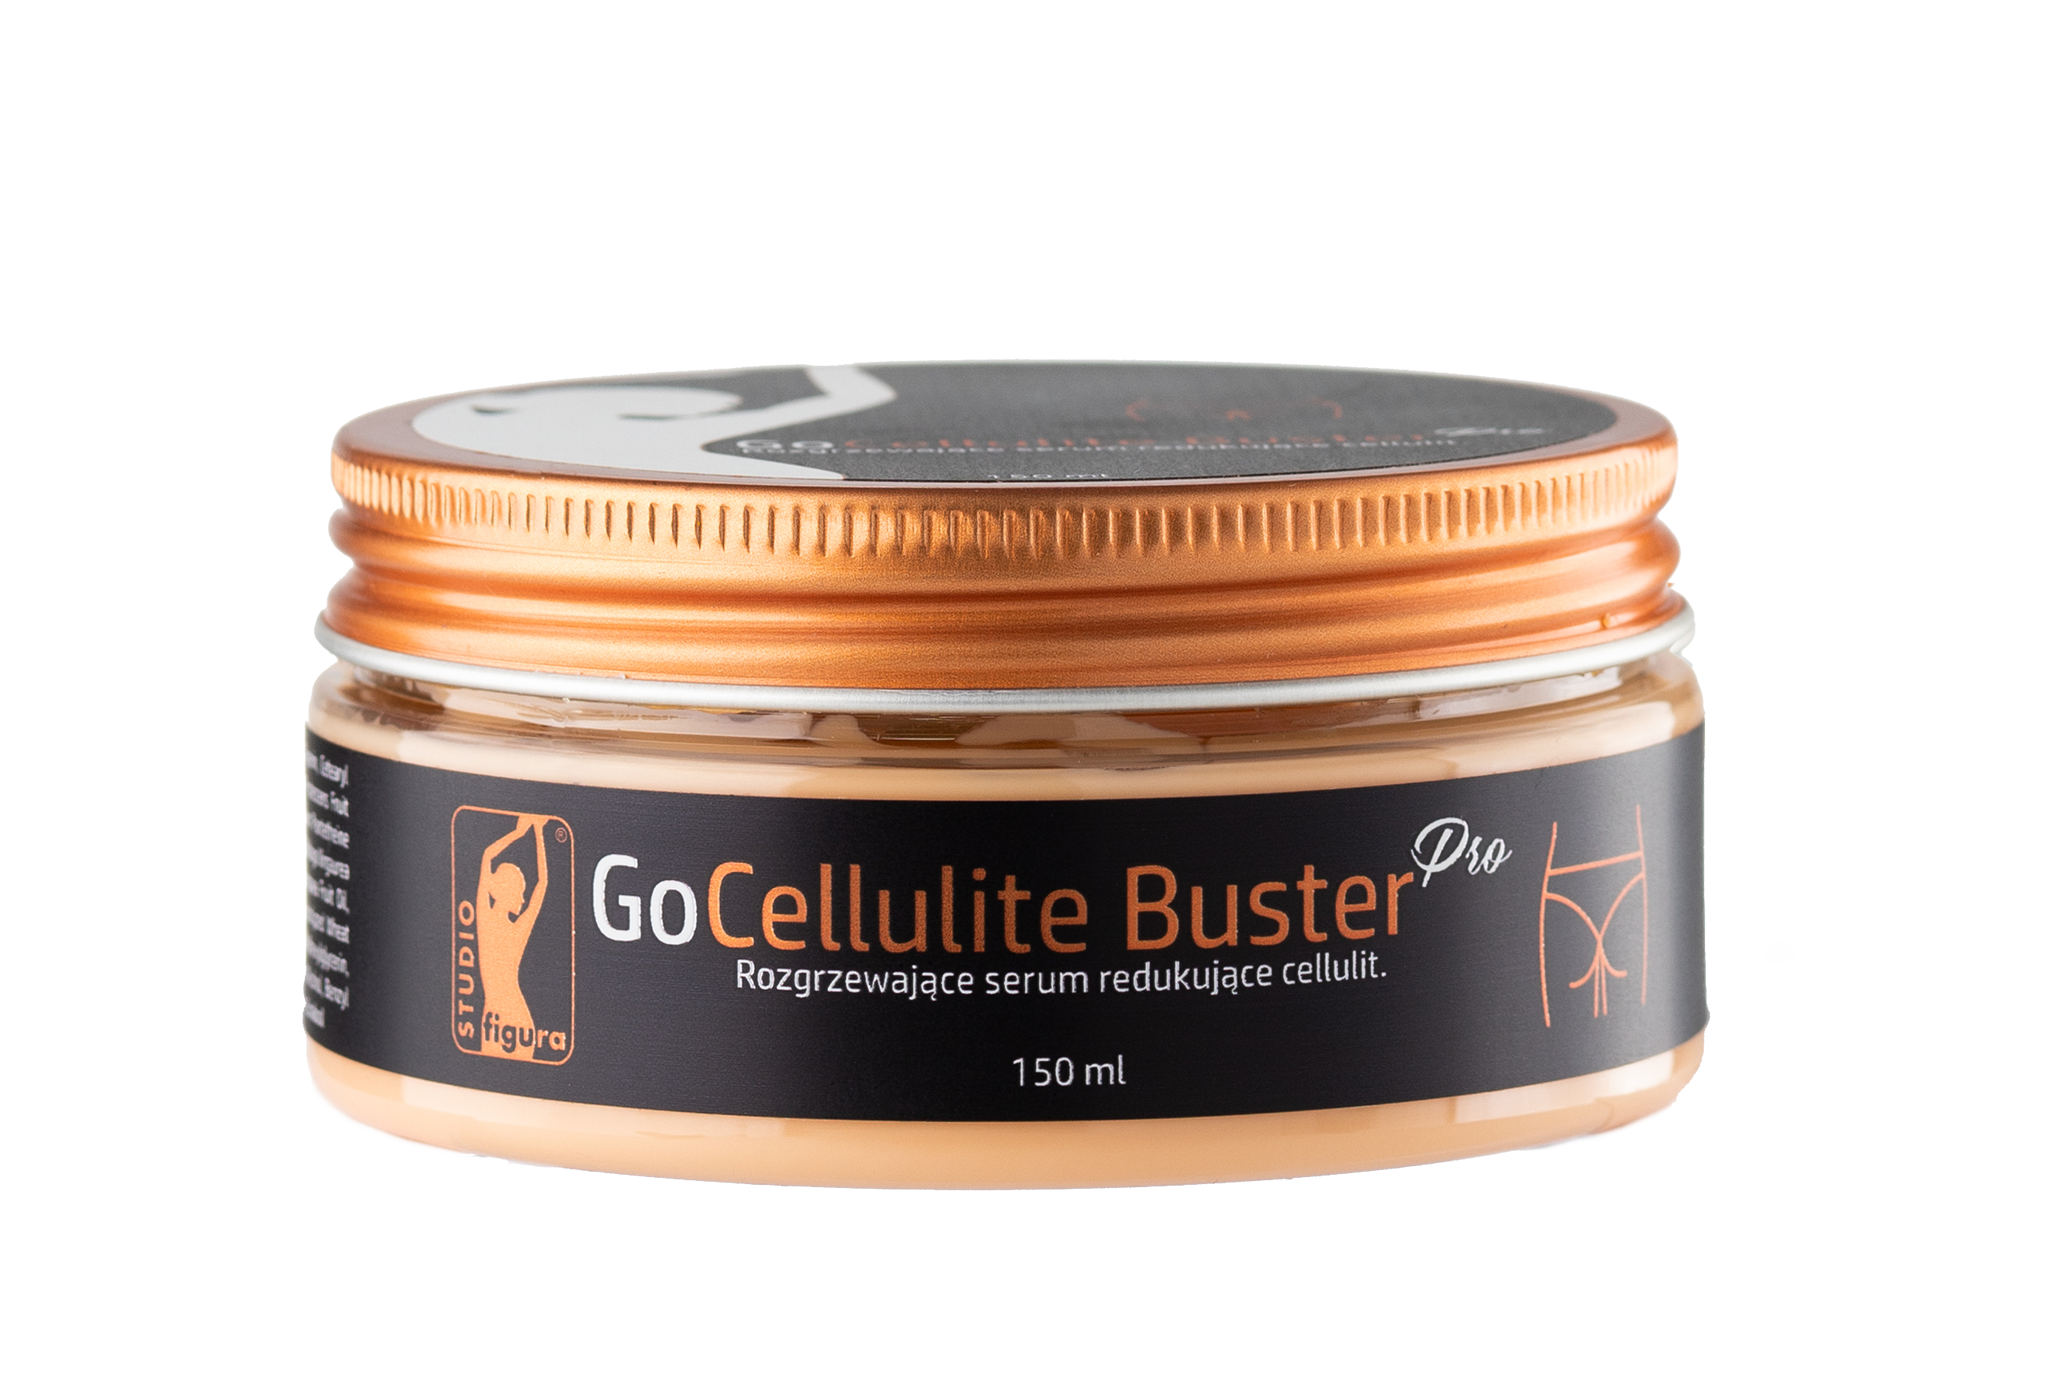 Go Cellulite Buster